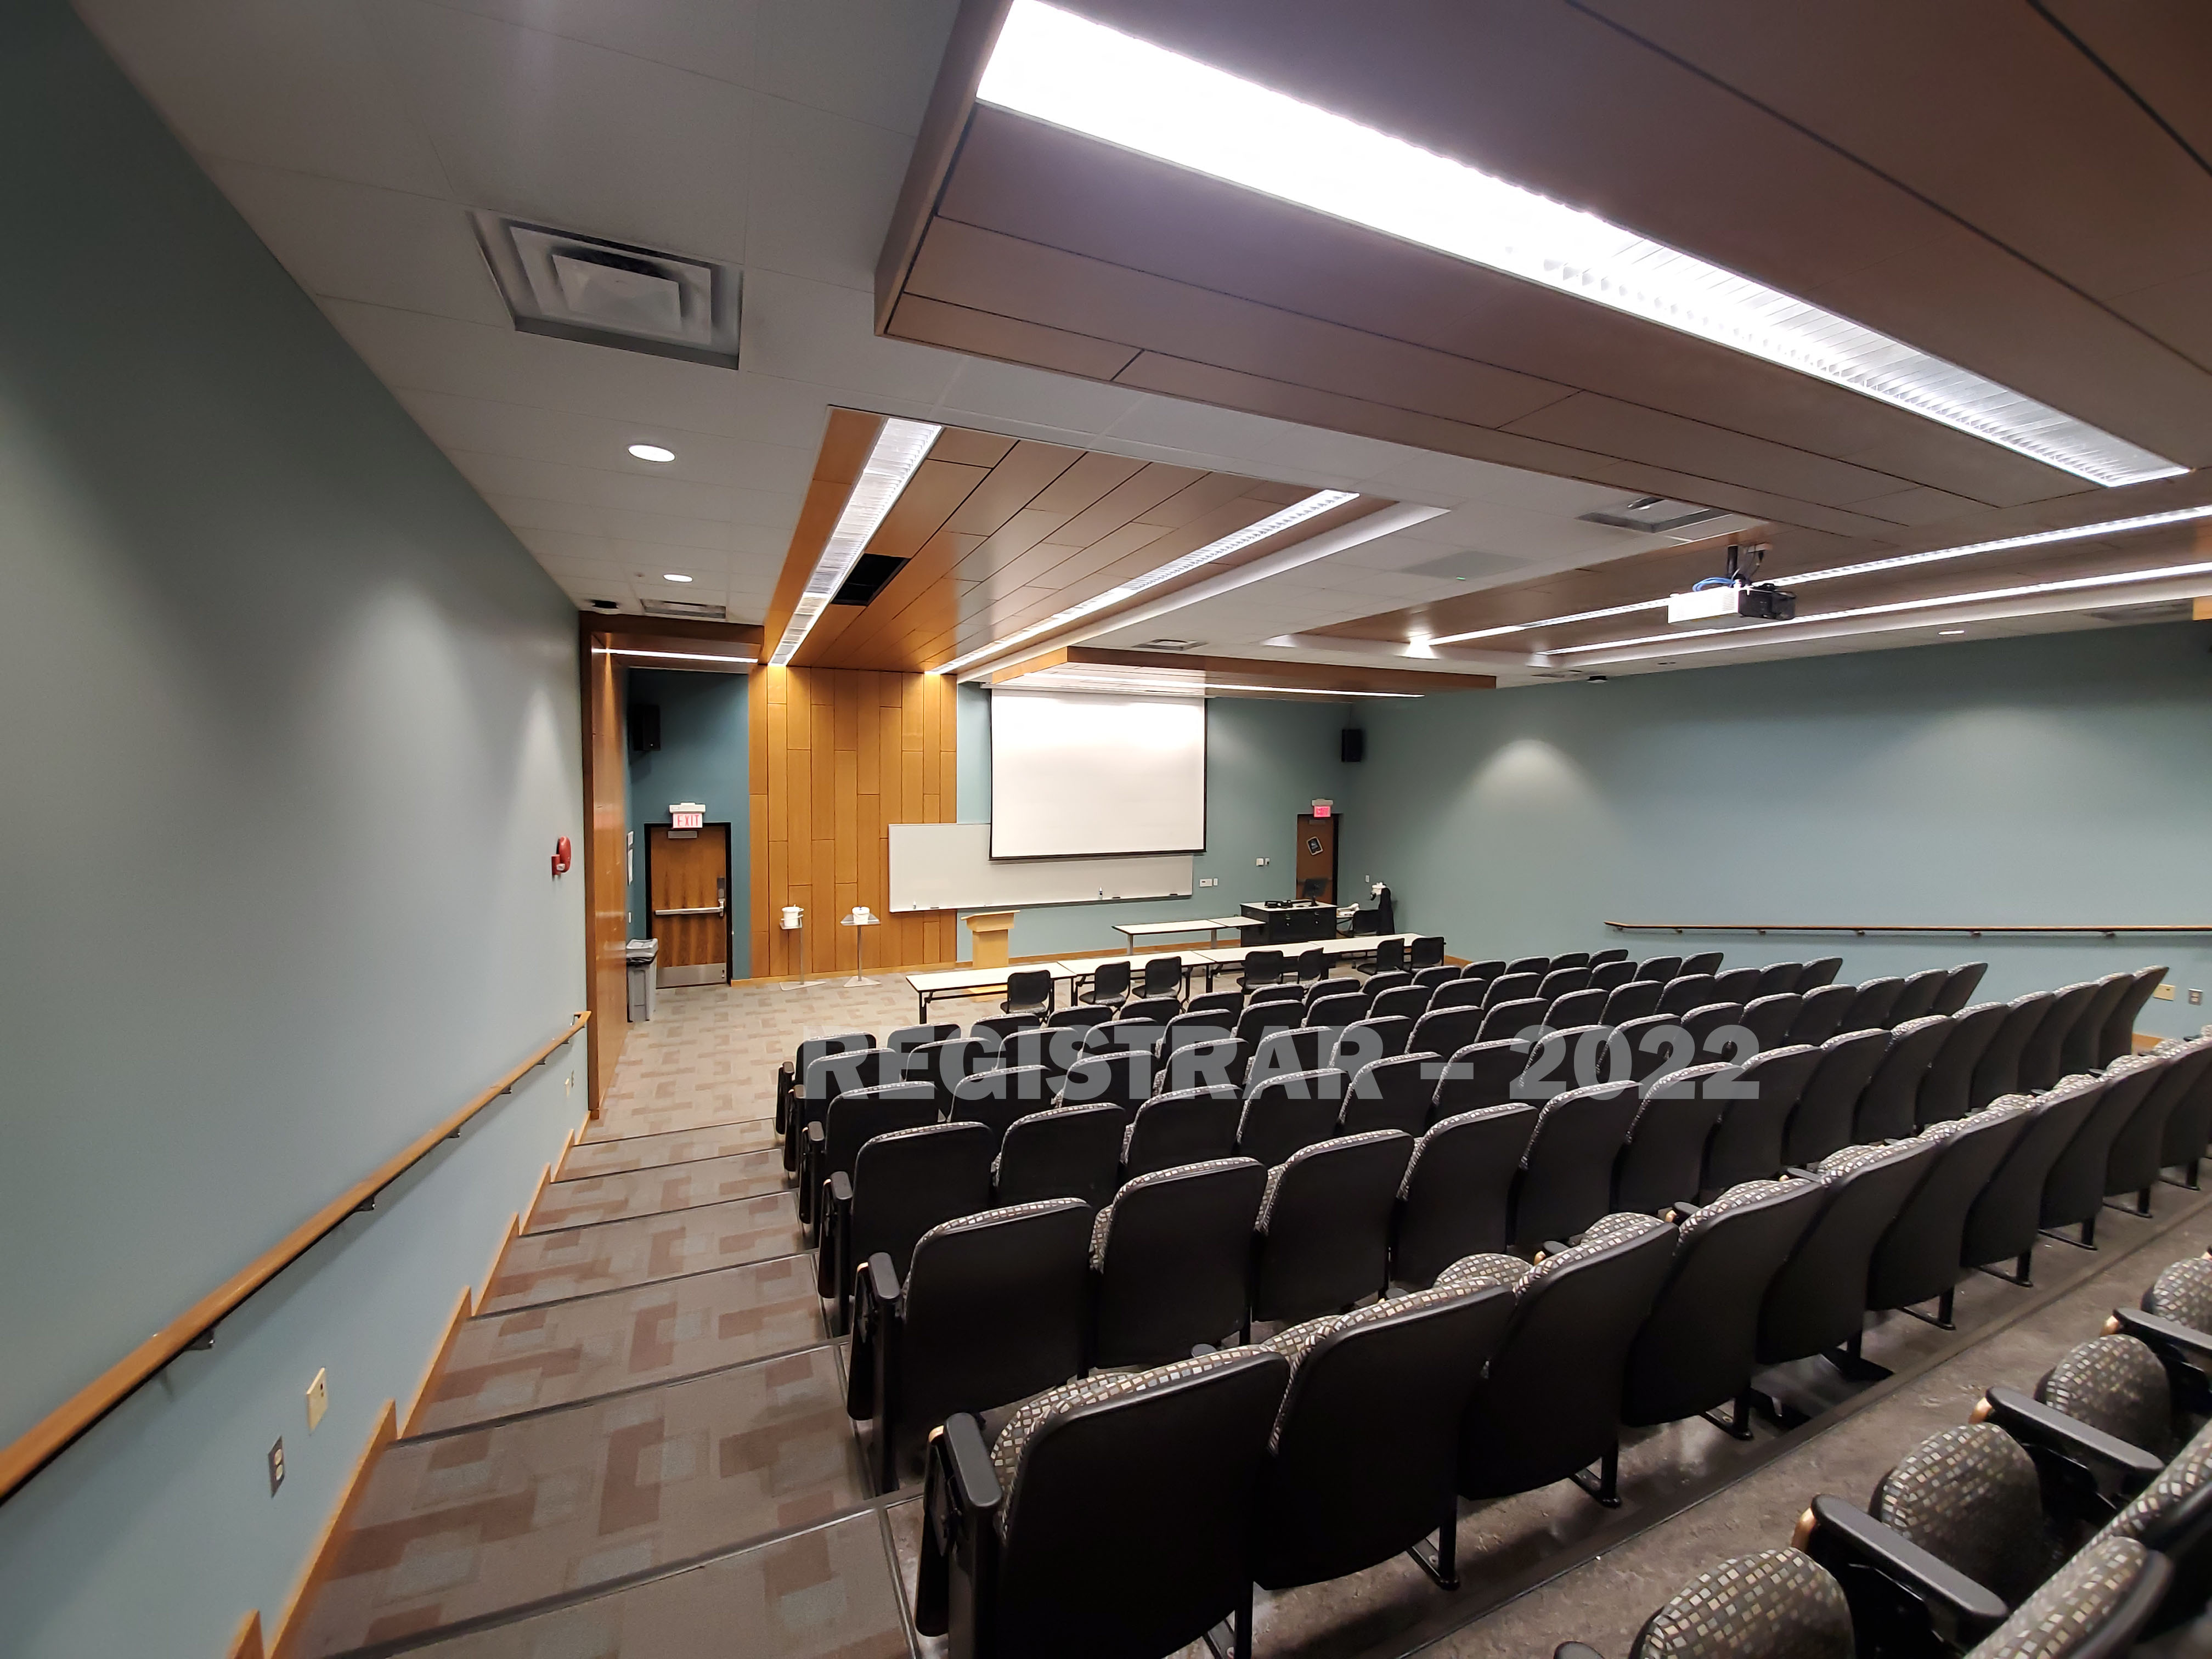 Journalism Building room 360 ultra wide angle view from the back of the room with projector screen down